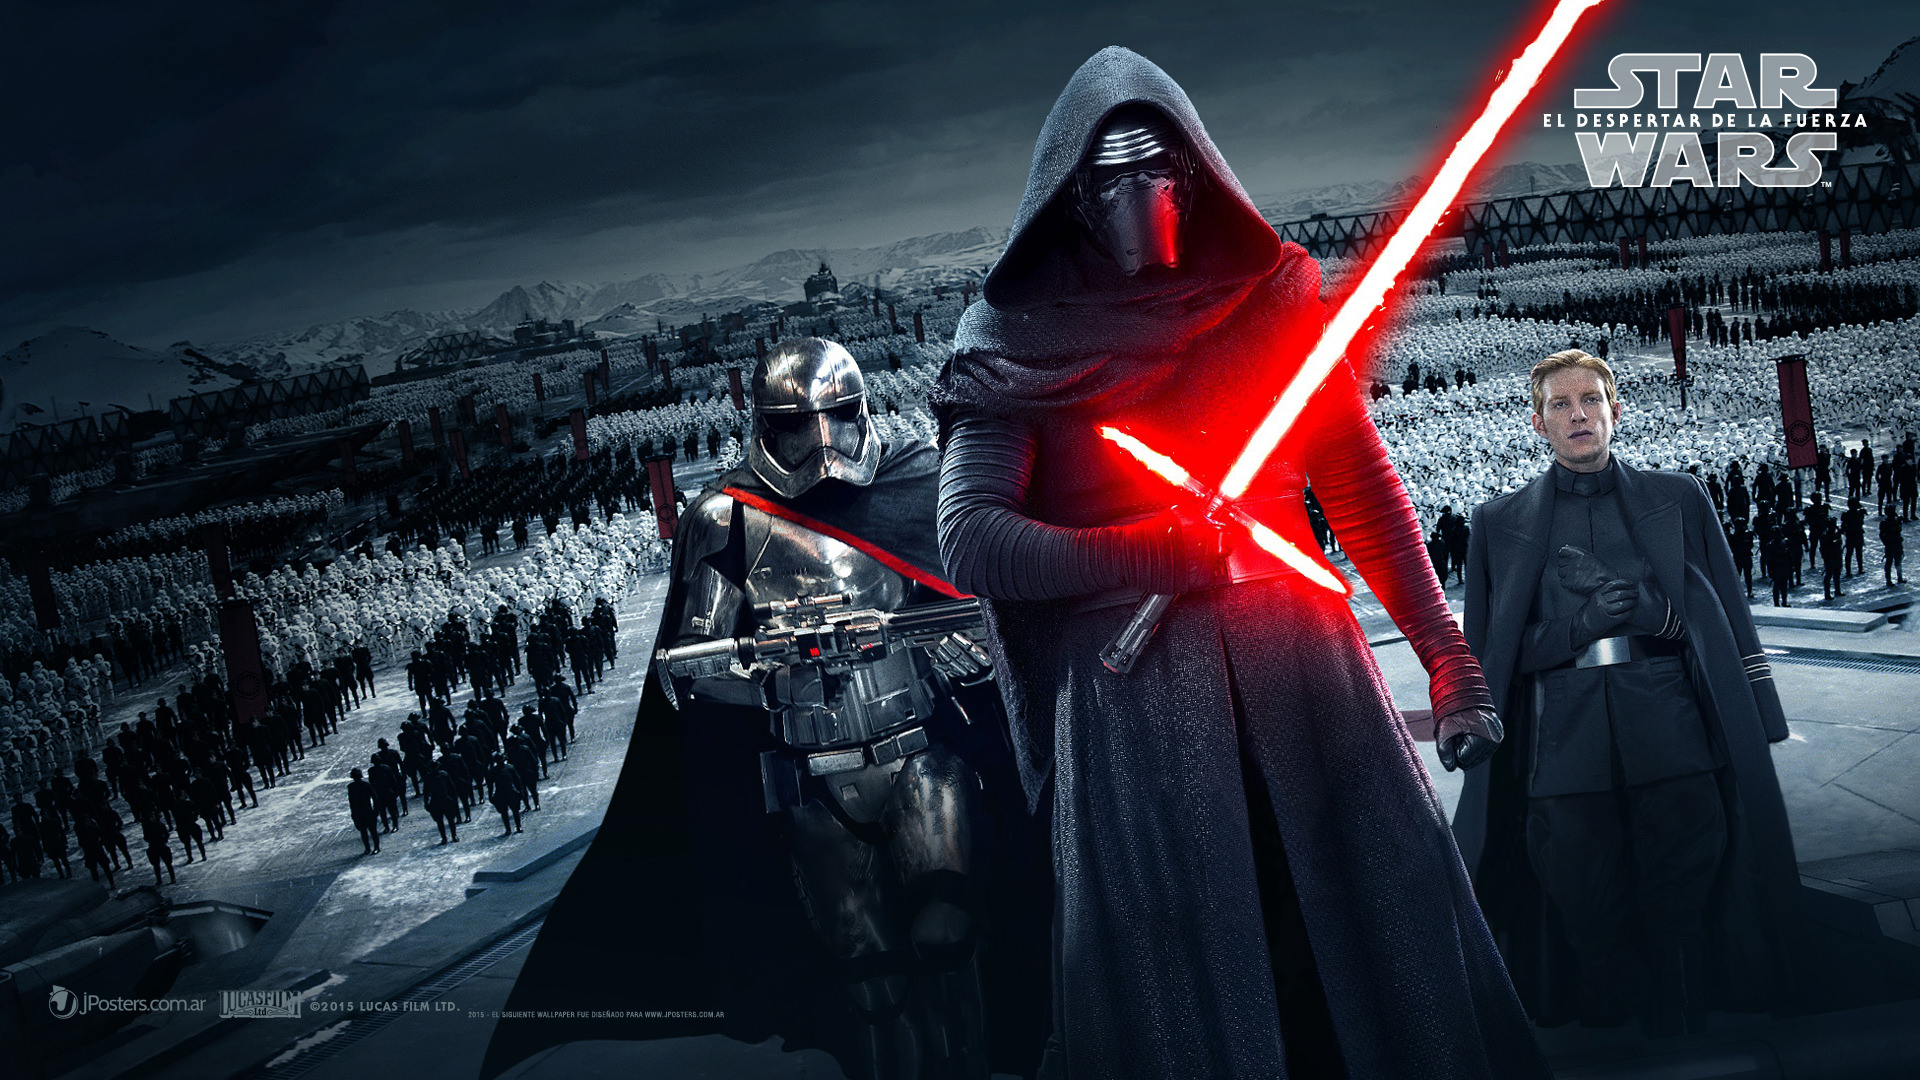 What Are The Critics Saying About Star Wars: The Force Awakens?